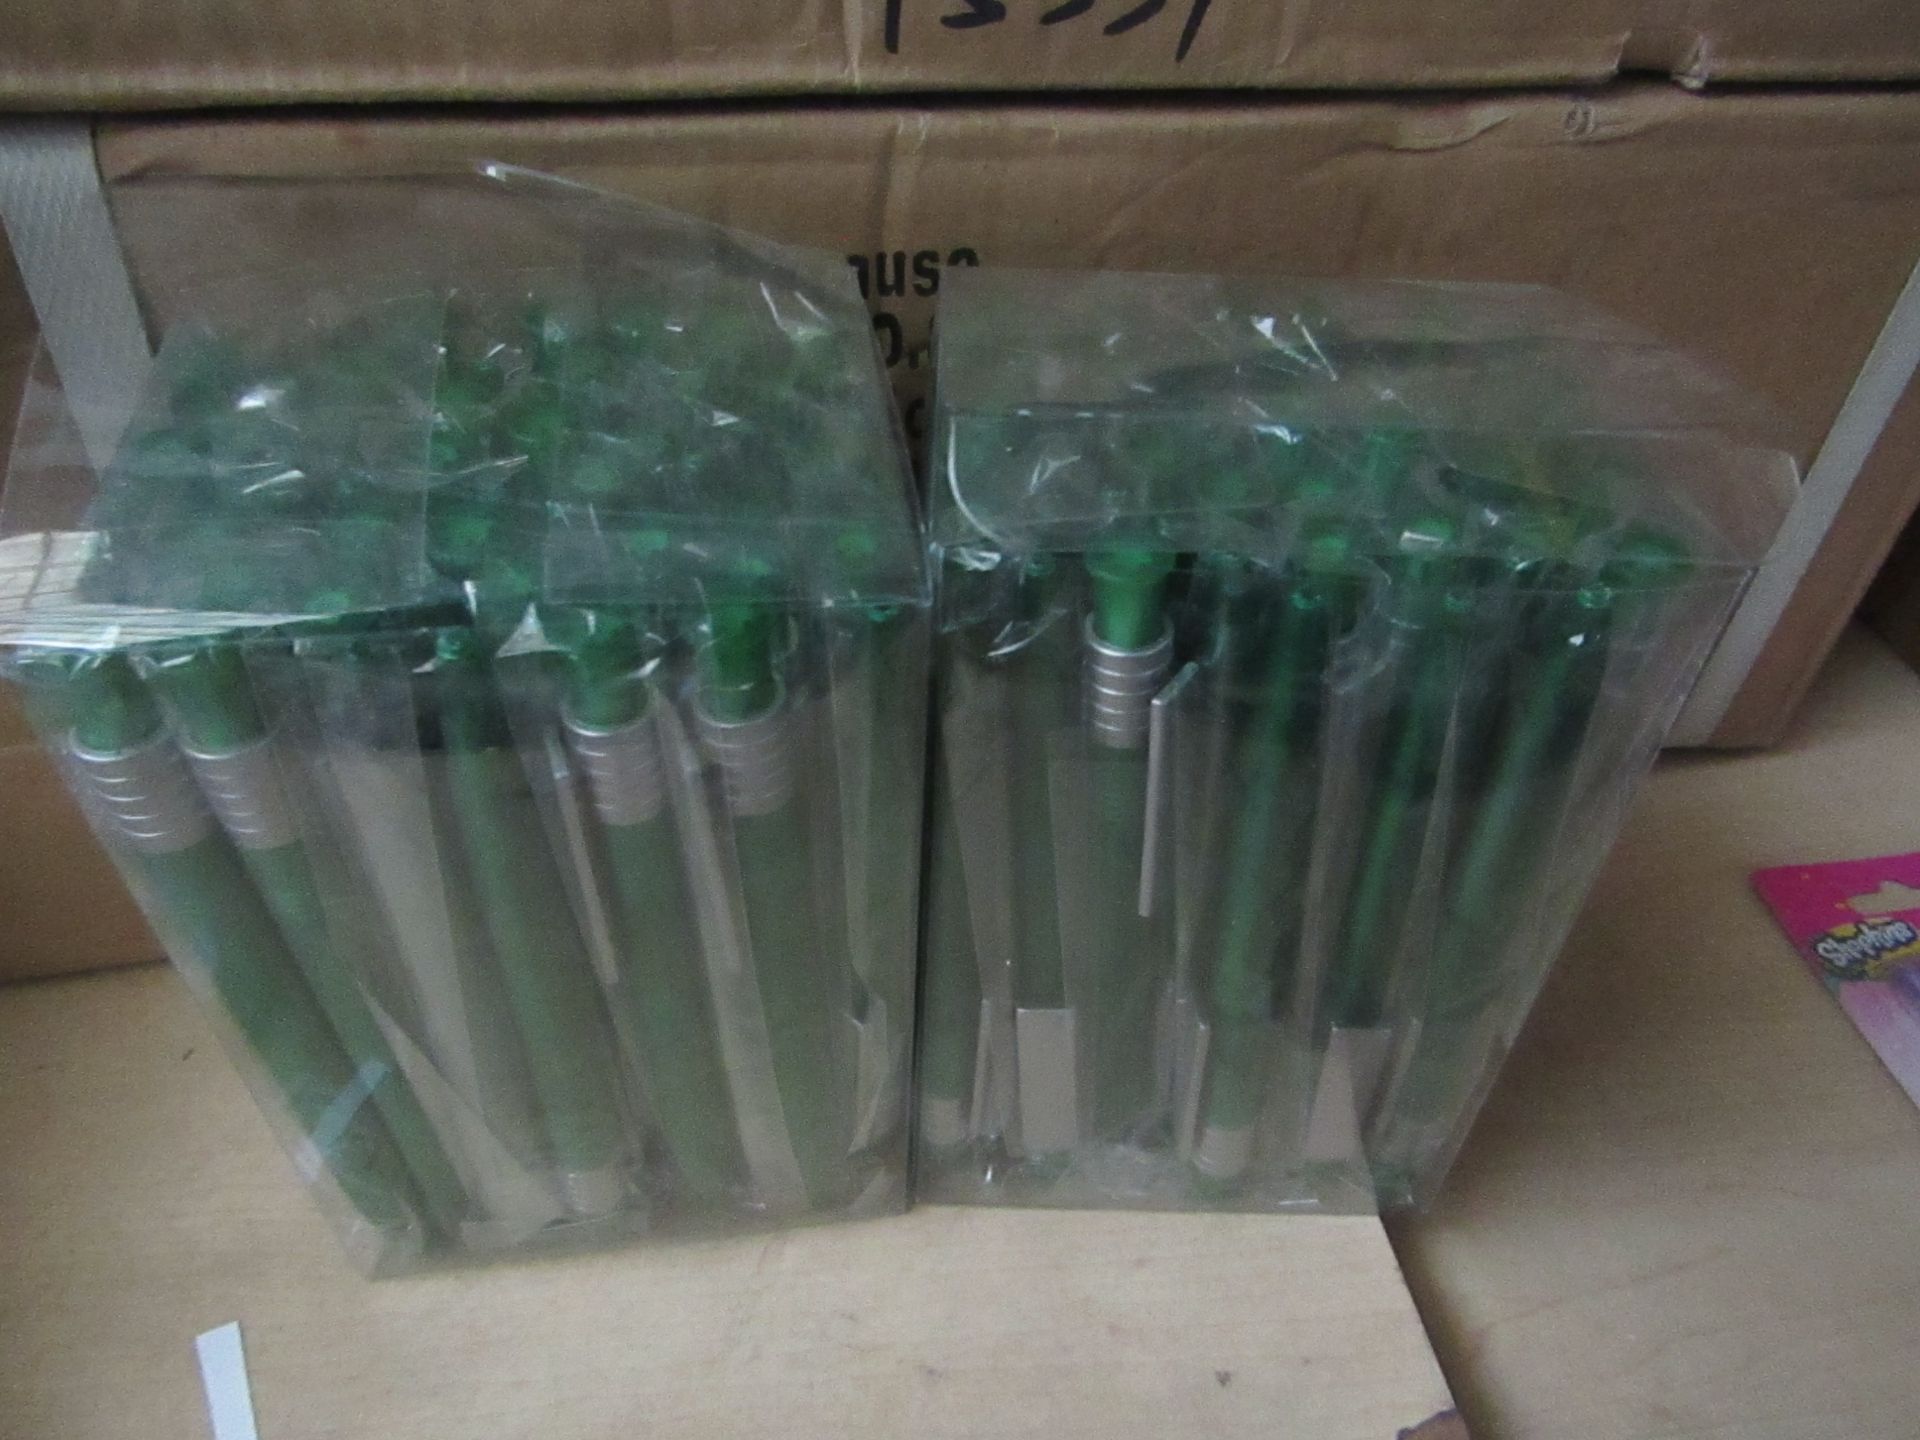 2 x packs of 50 Ball Point Pens new & packaged